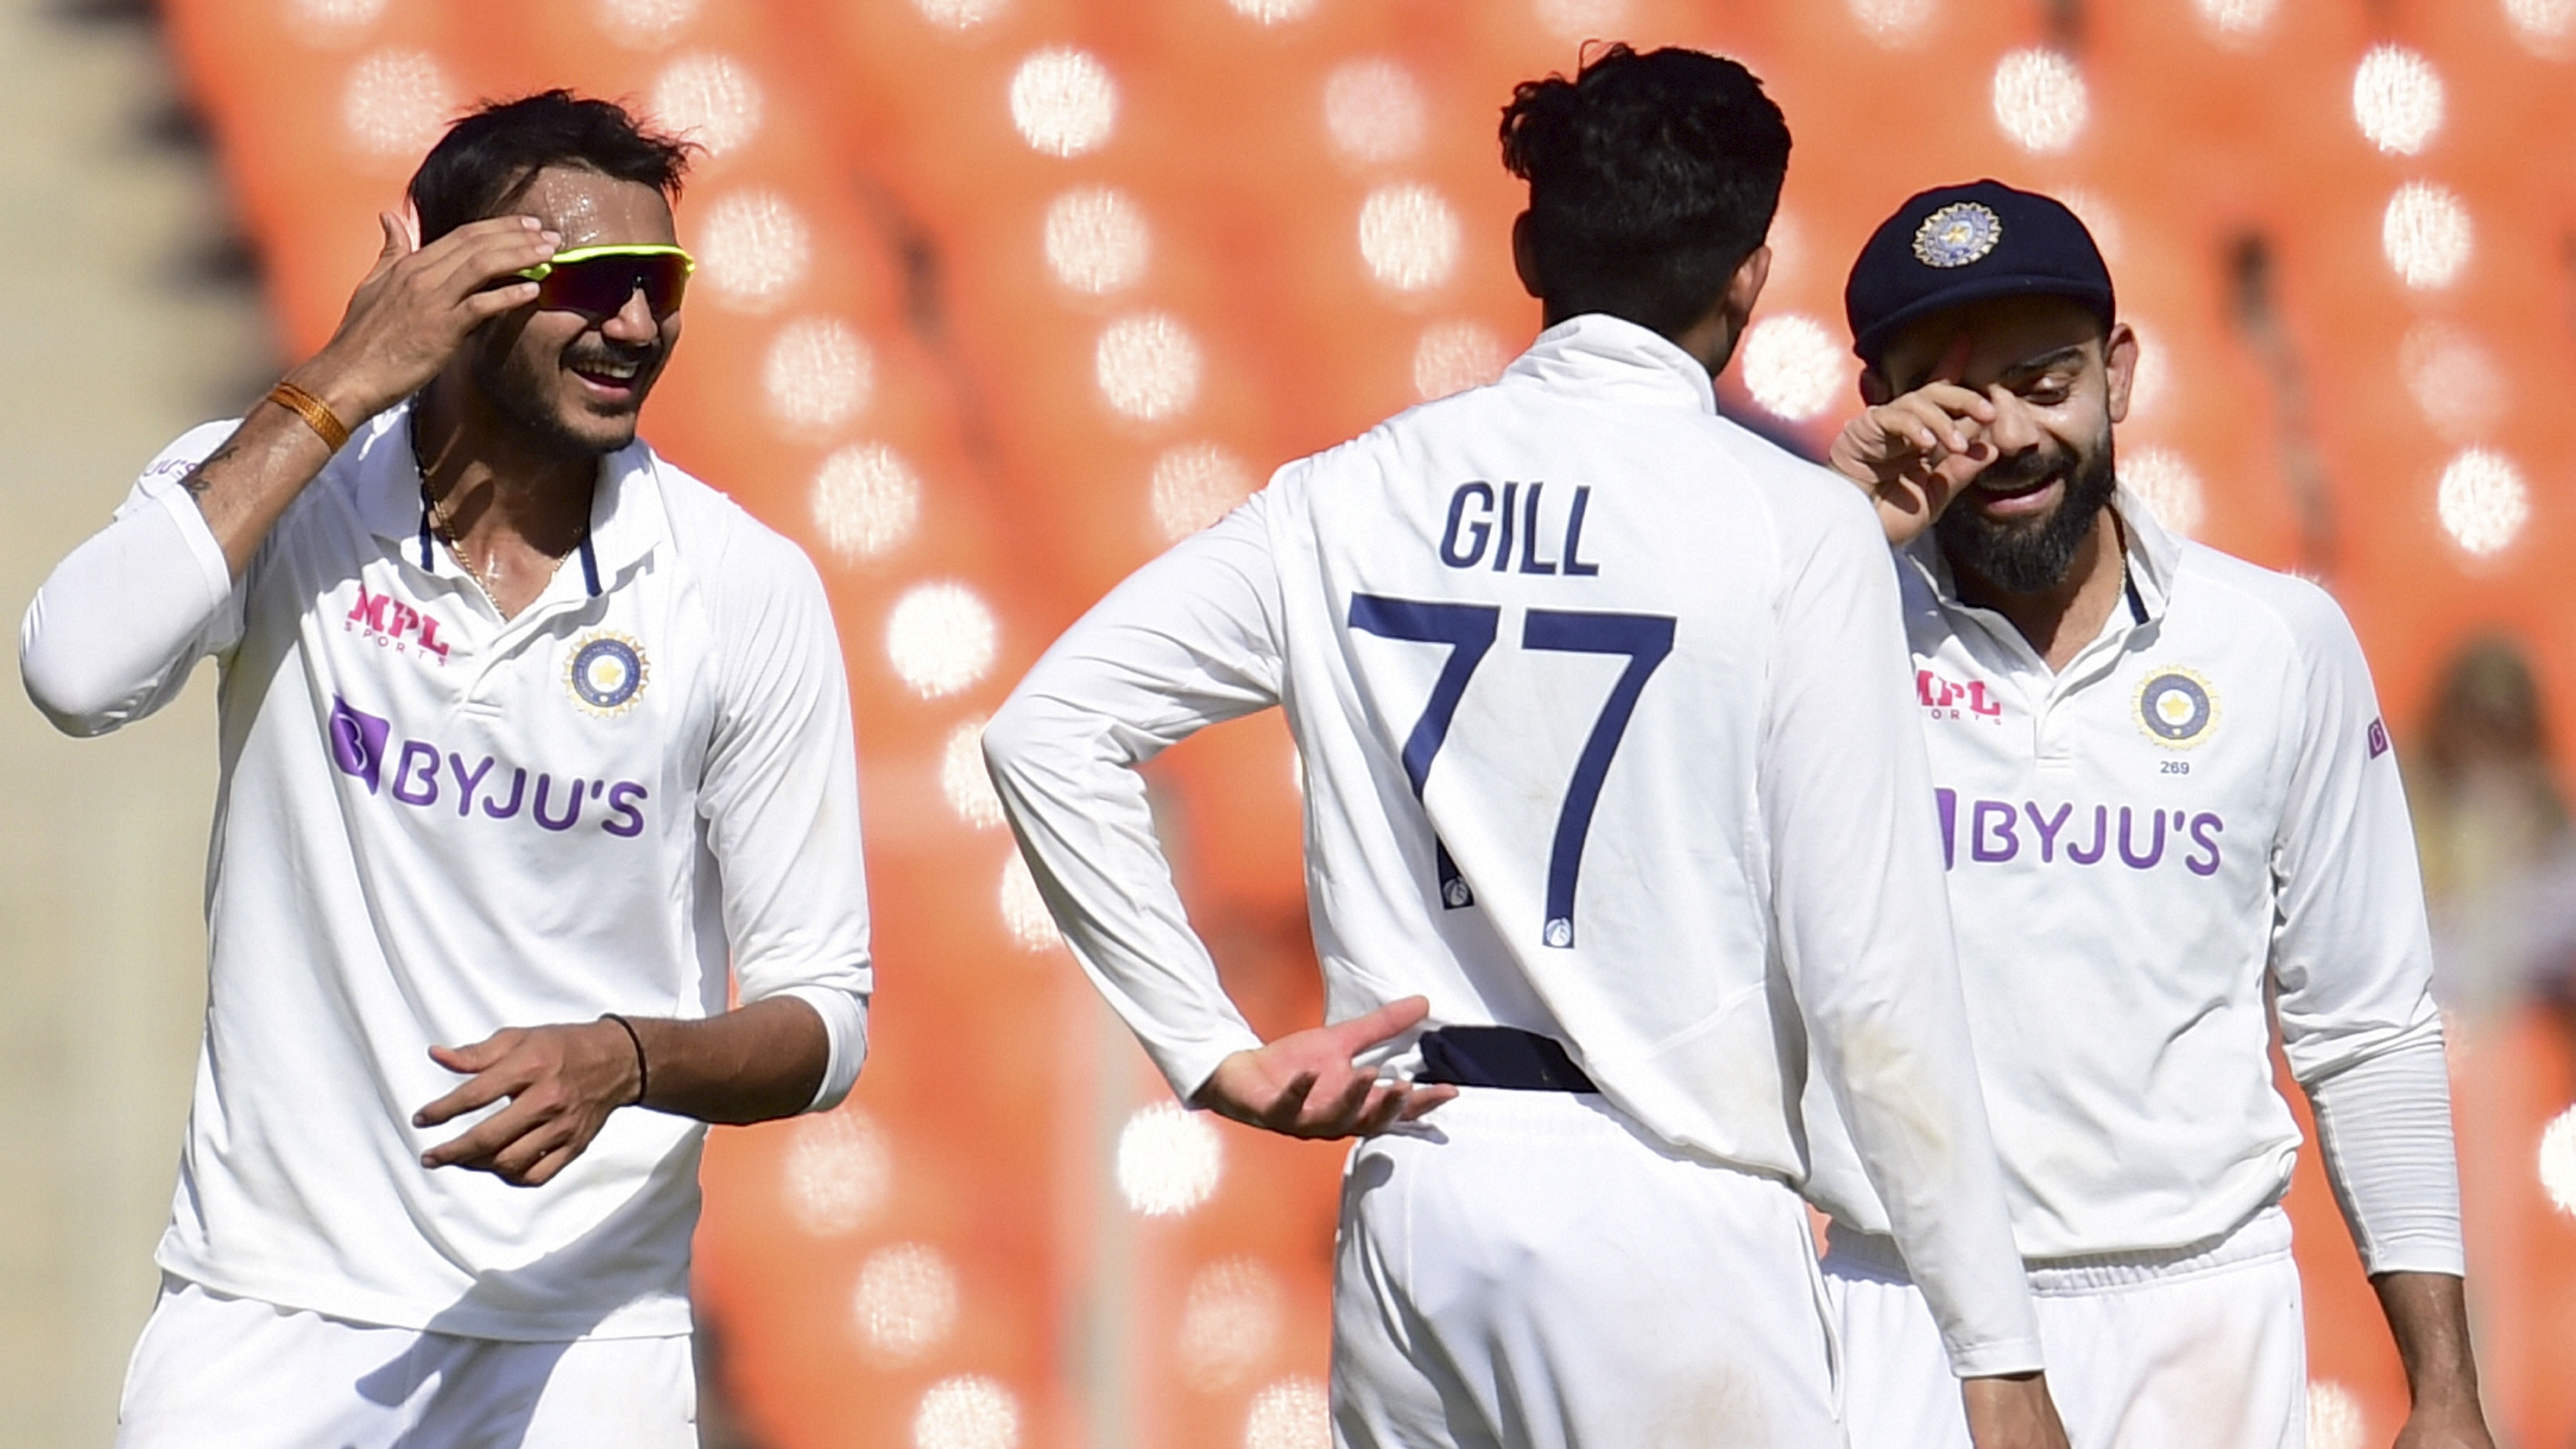  Indian captain Virat Kohli celebrates with bowler Axar Patel (L) and player S Gill (C) against England in a Test series in Ahmedabad. Credit: PTI Photo